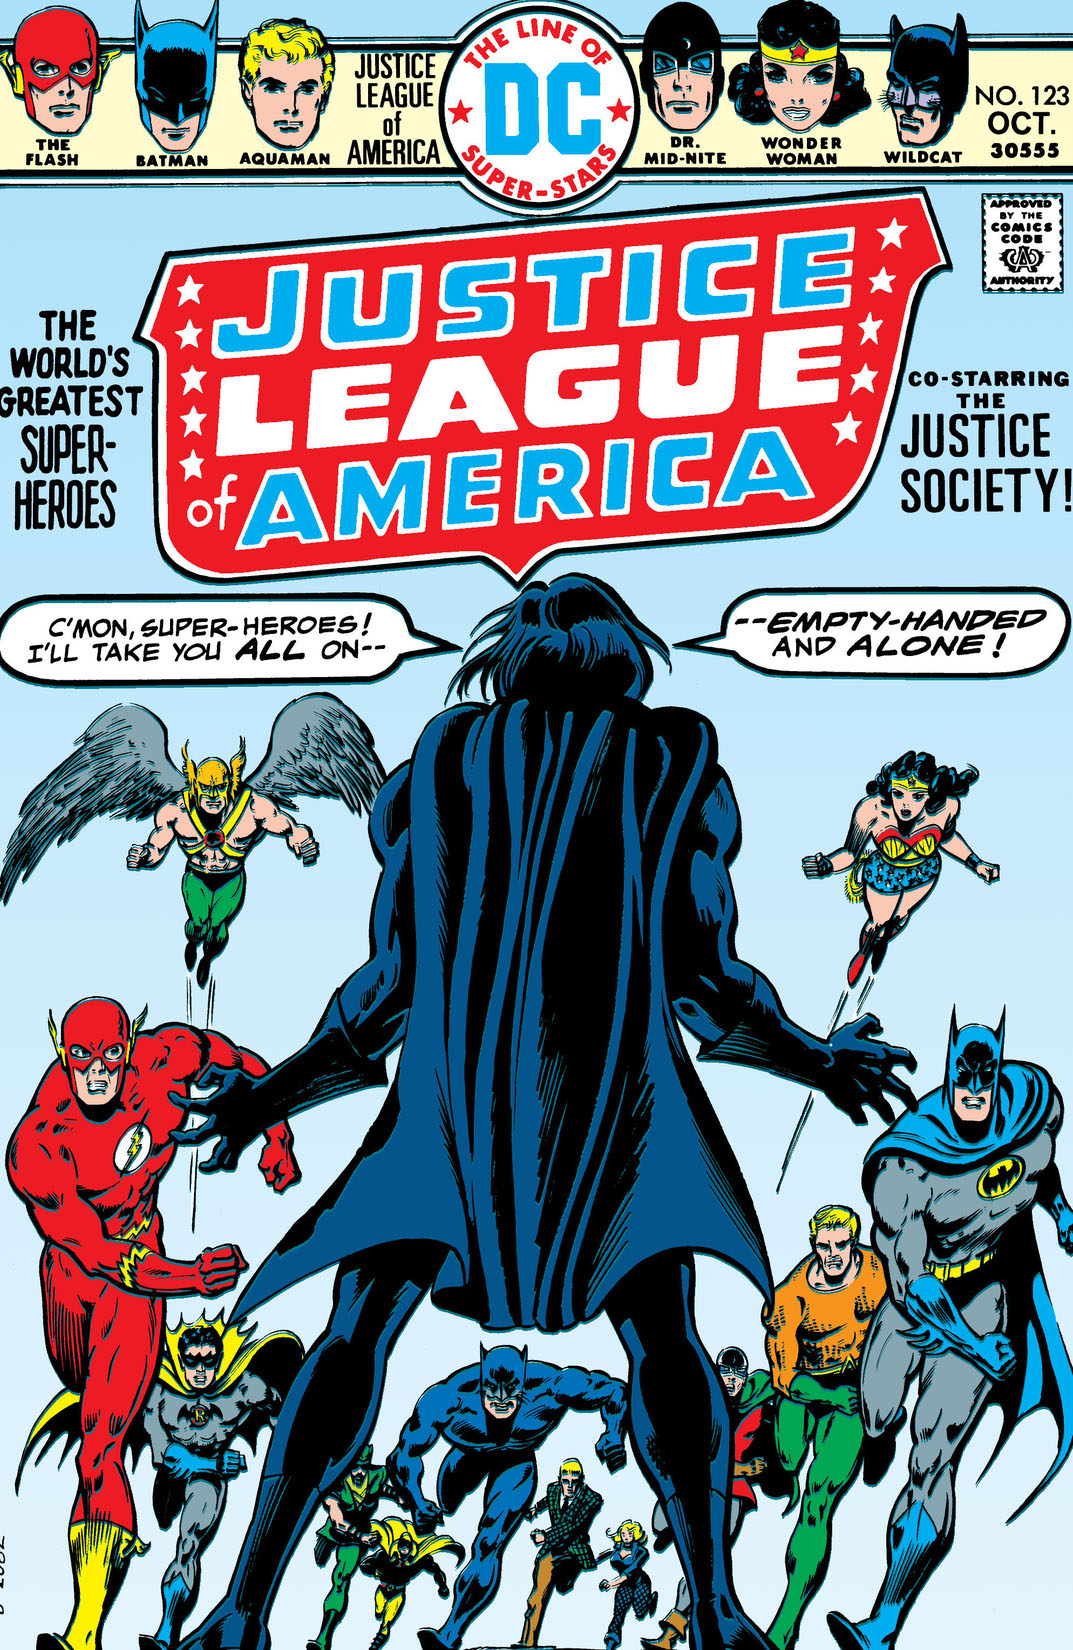 Justice League of America (1960-) #123 preview images